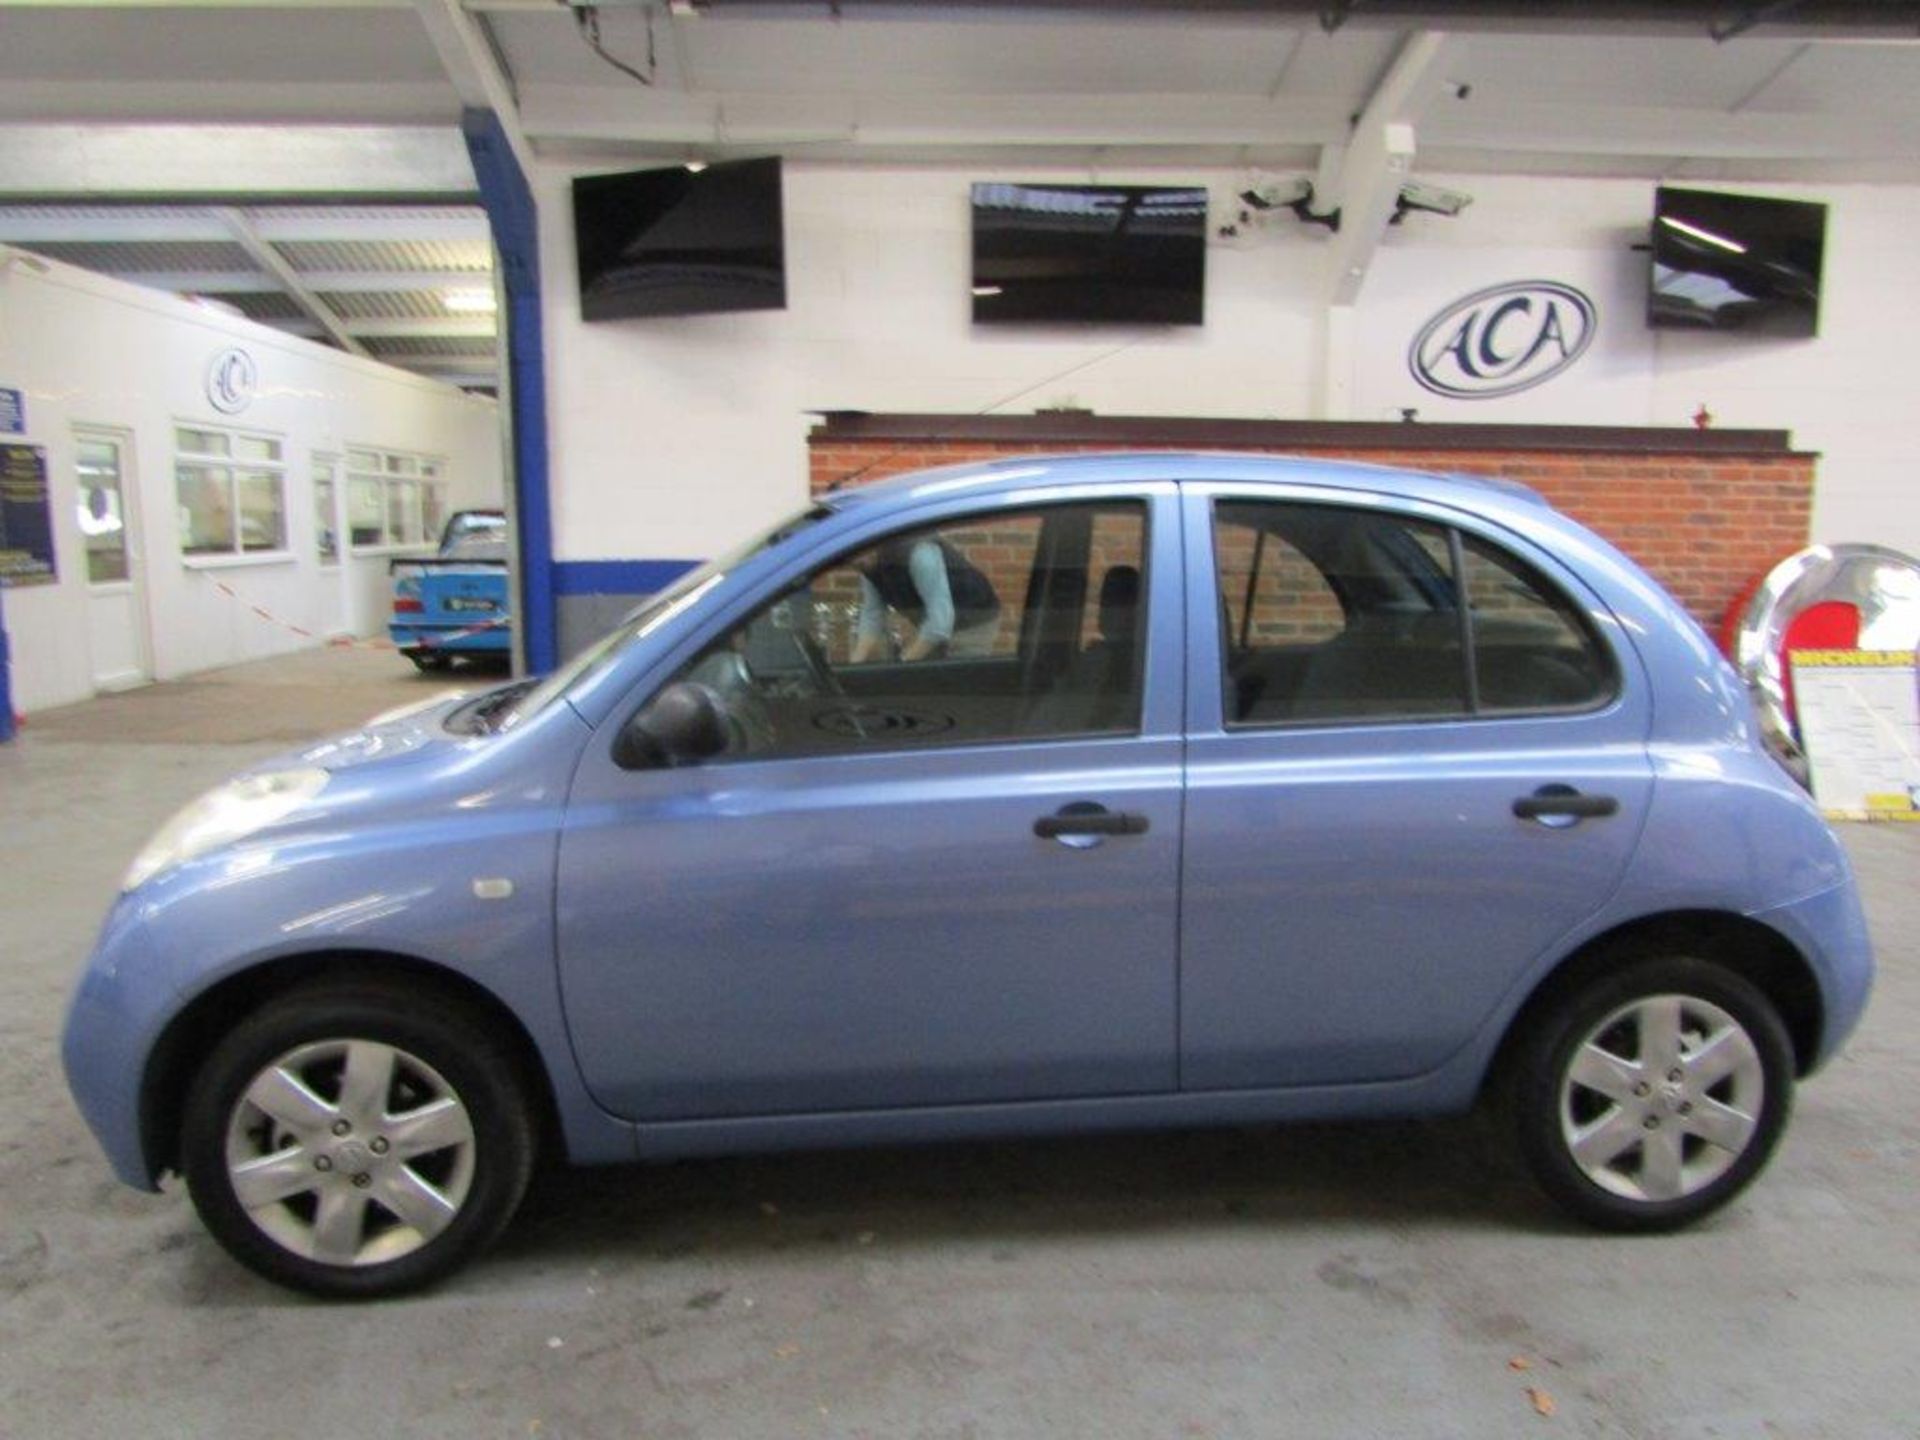 54 04 Nissan Micra S - Image 2 of 19